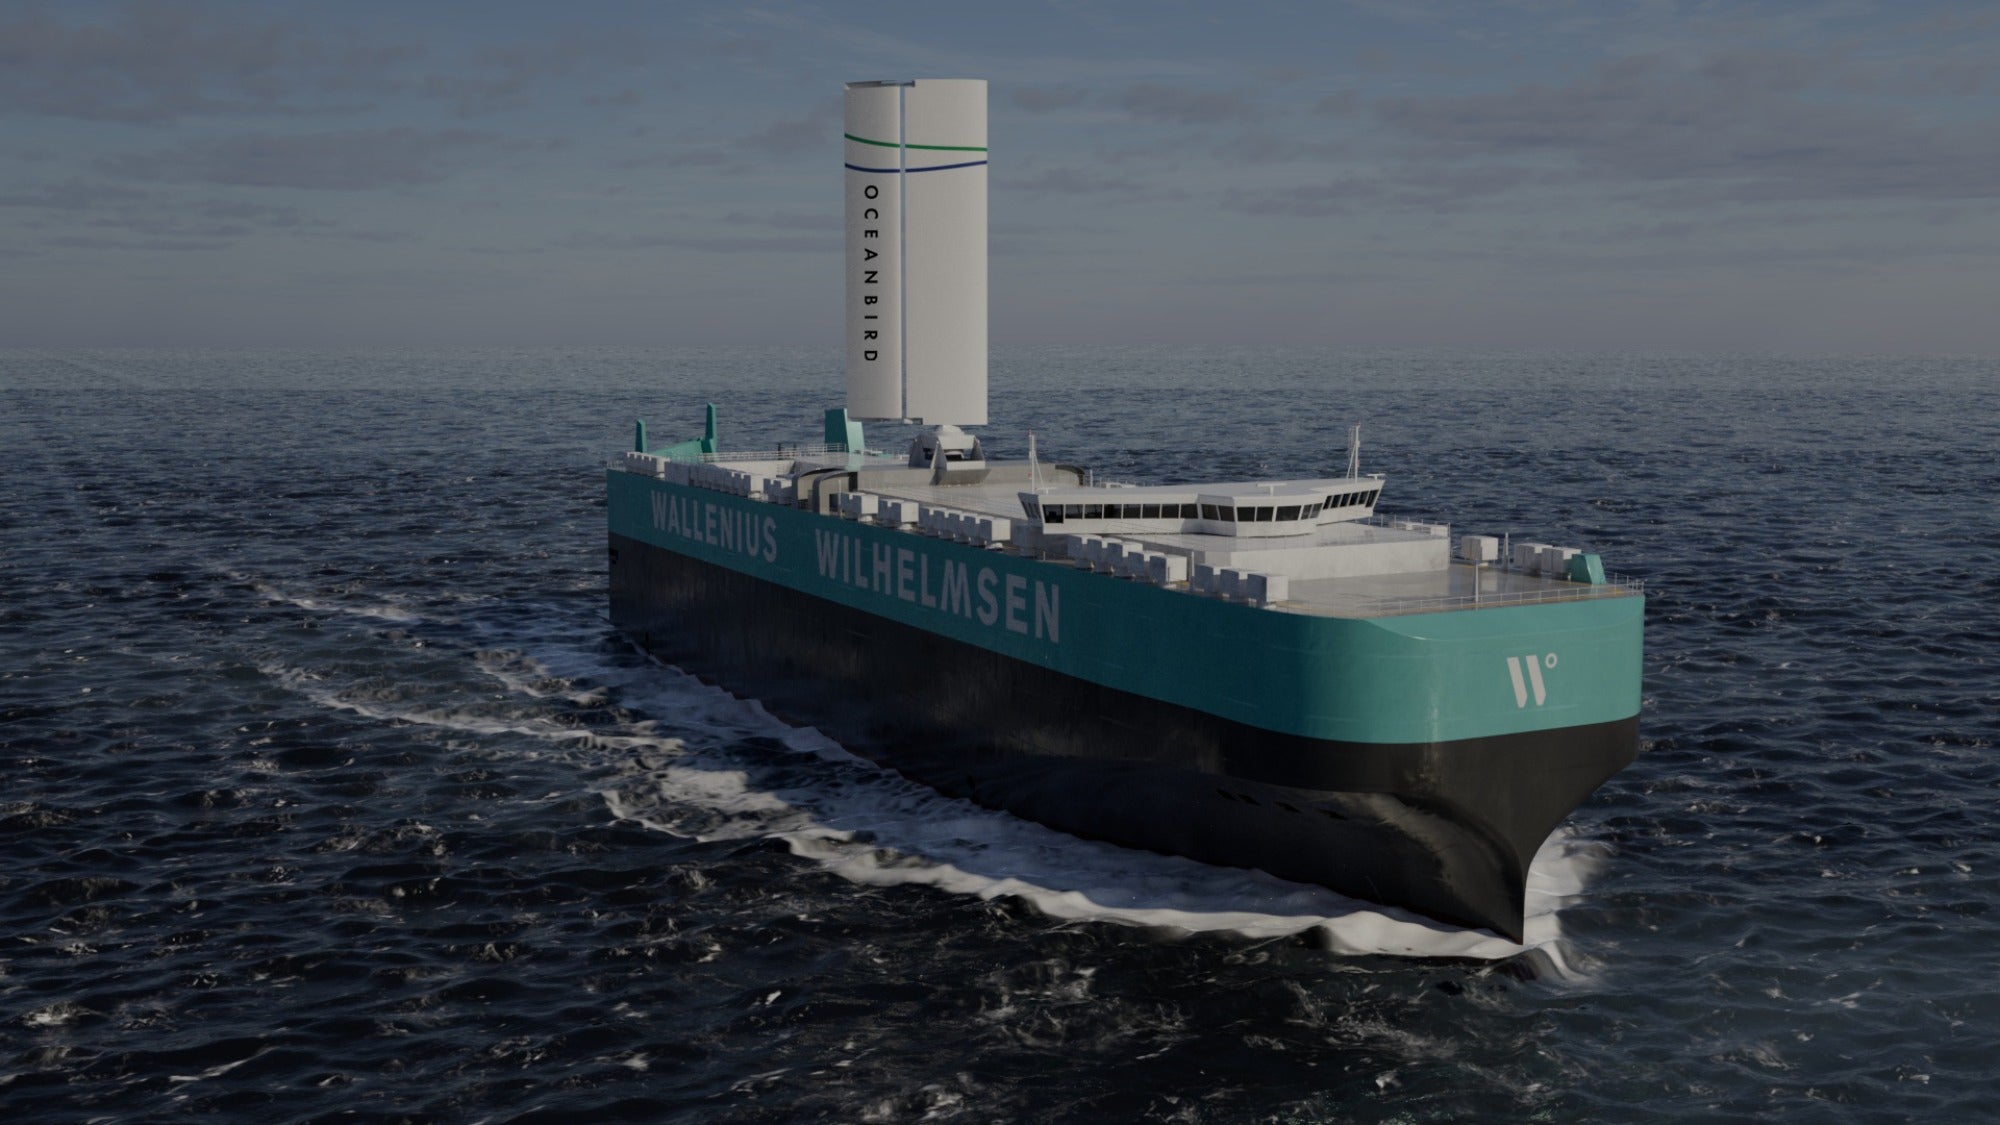 This company is testing out shipping vessel sails